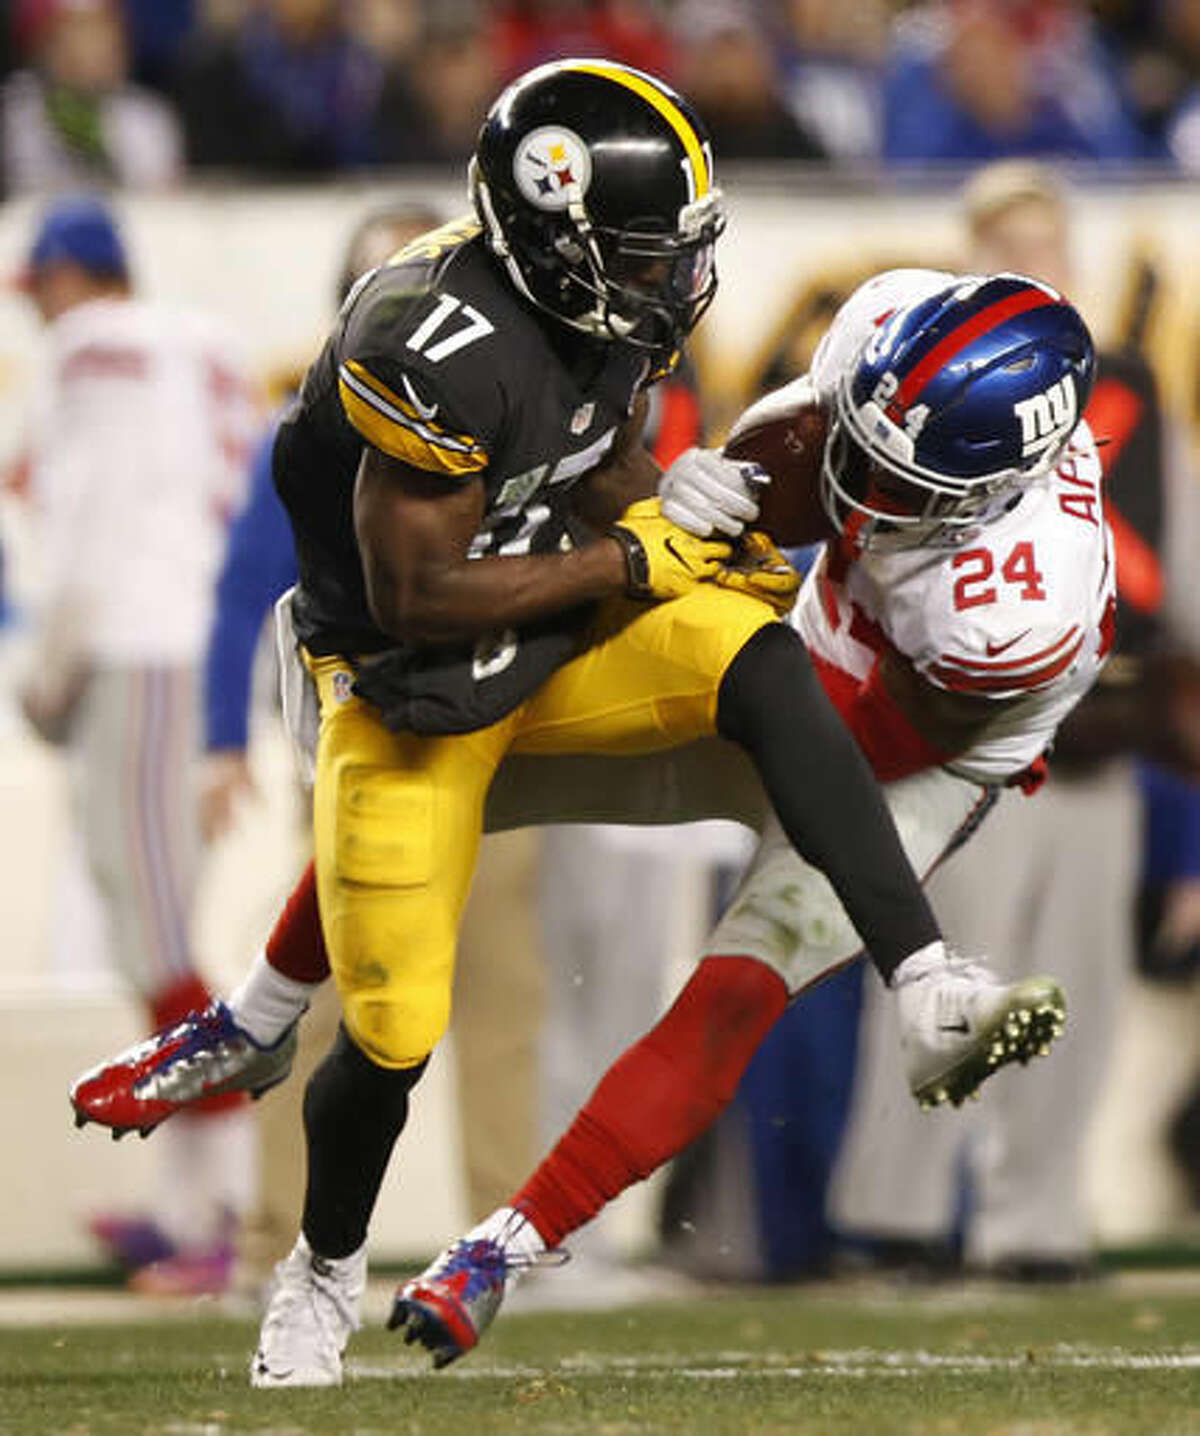 New York Giants cornerback Eli Apple (24) intercepts pass intended for Pittsburgh Steelers wide receiver Eli Rogers (17) during the second half of an NFL football game in Pittsburgh, Sunday, Dec. 4, 2016. (AP Photo/Jared Wickerham)